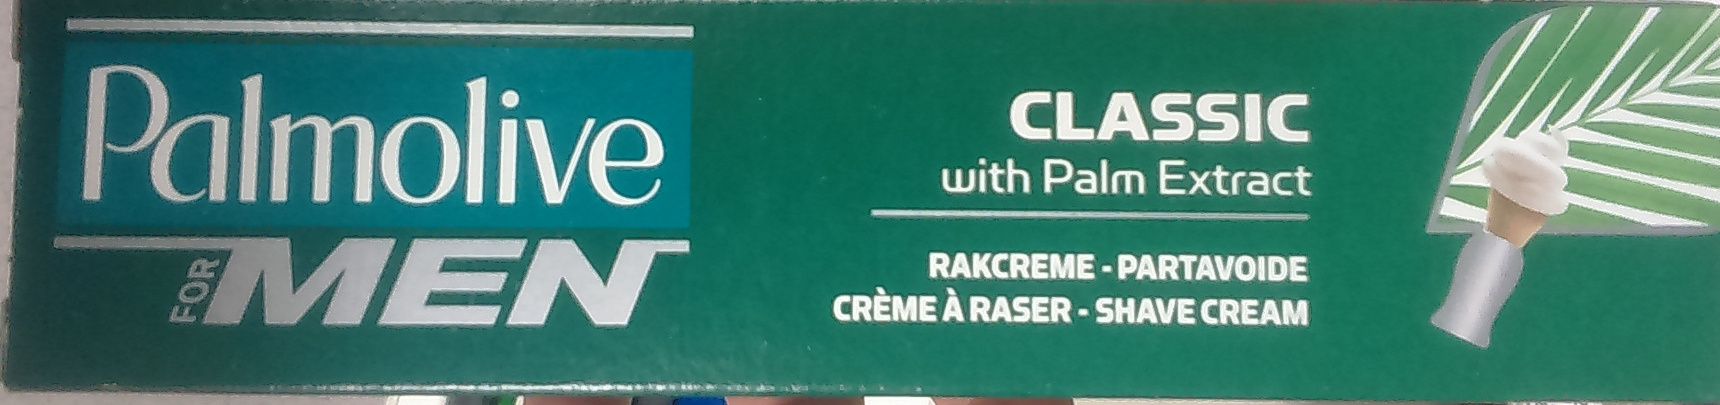 Classic with palm extract - Product - fr